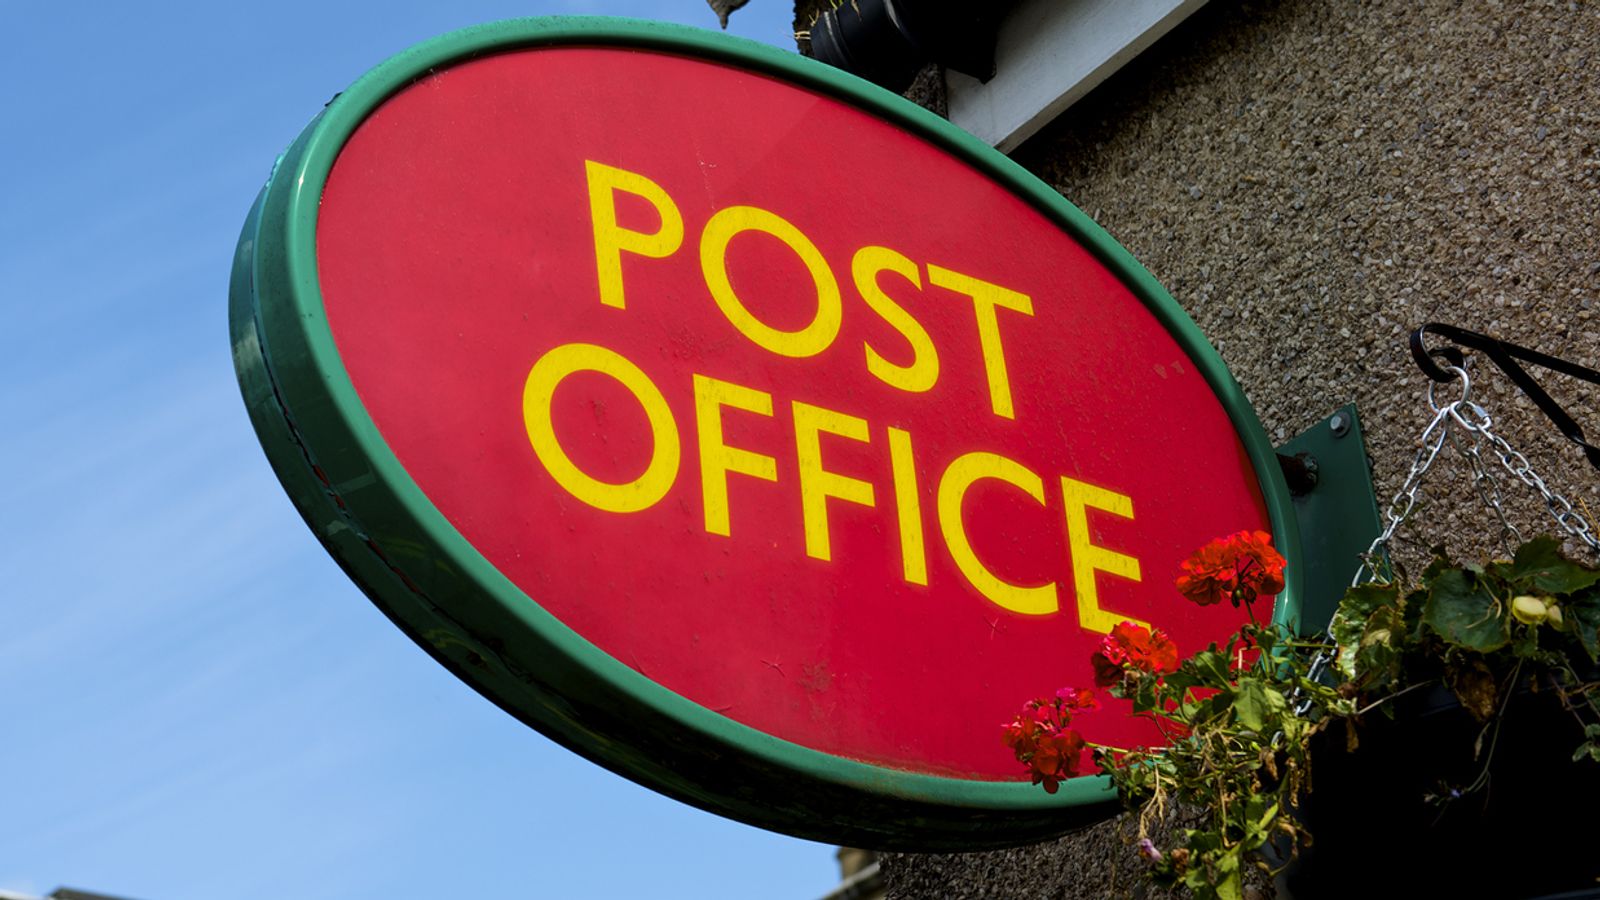 Post Office scandal: Scottish victims placed in 'intolerable' position, court told